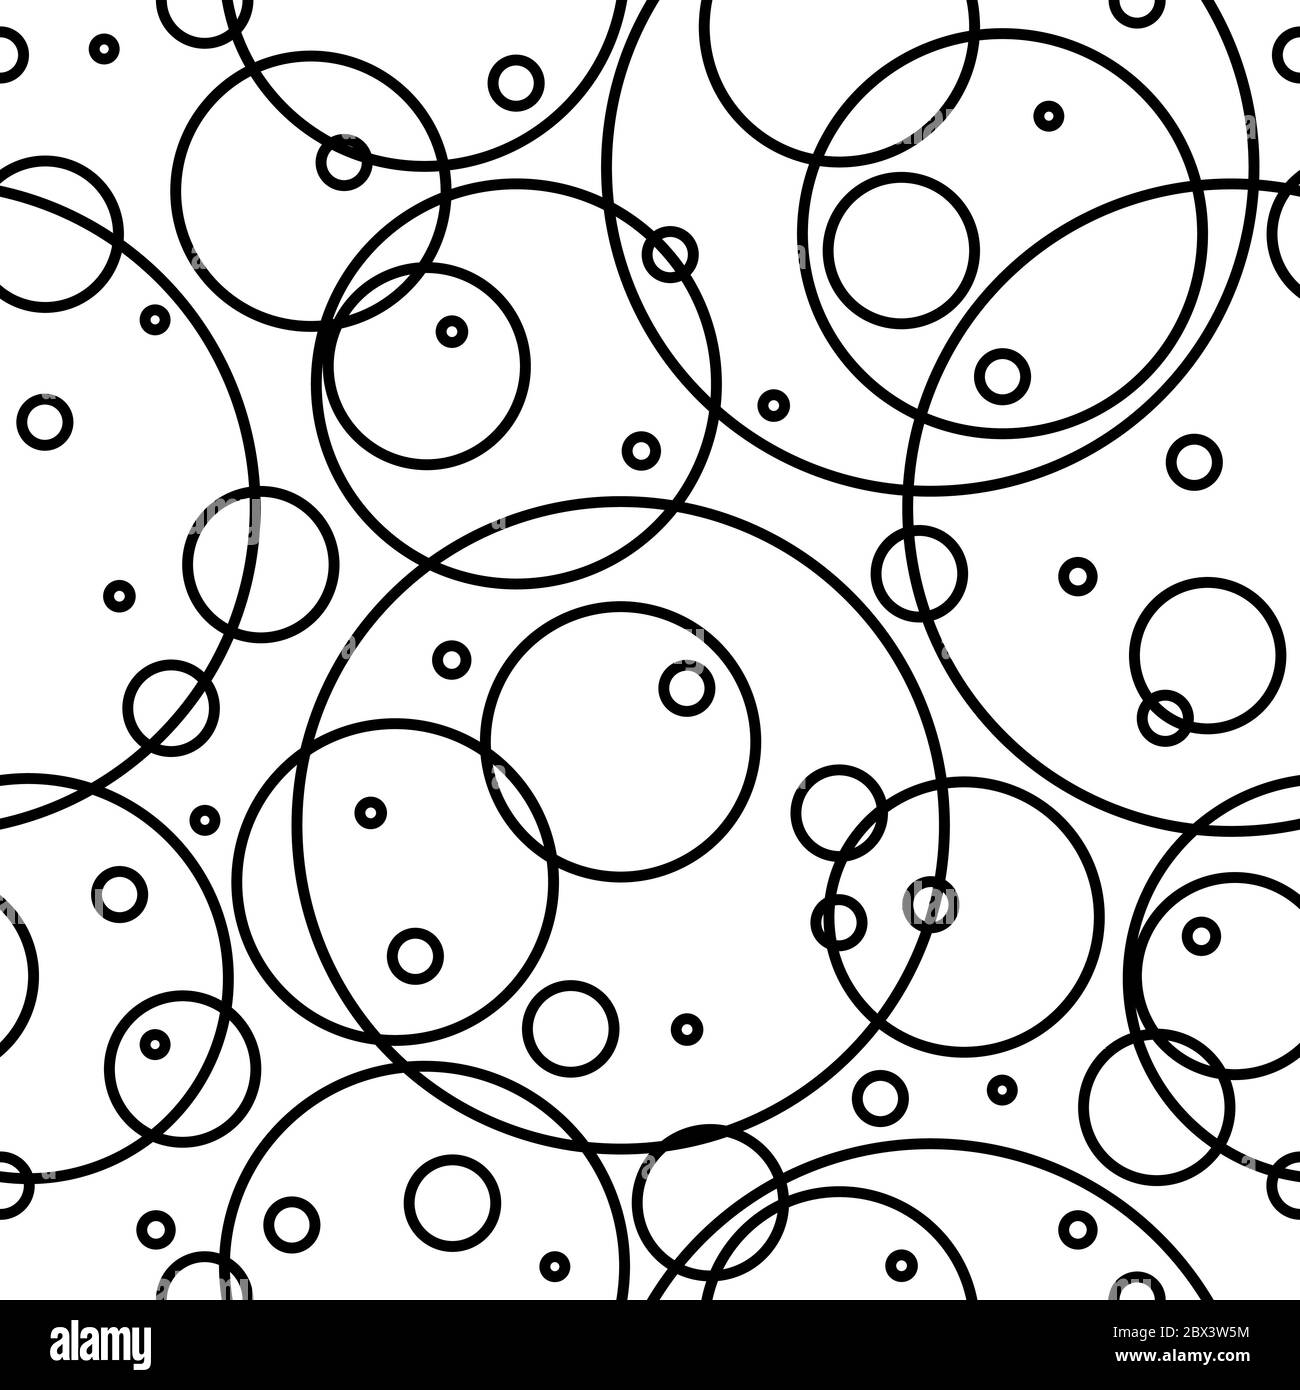 Seamless abstract pattern with black empty overlapping circles of different size. Bubbles and bulbs. White background. Vector. Calm classic design for Stock Vector